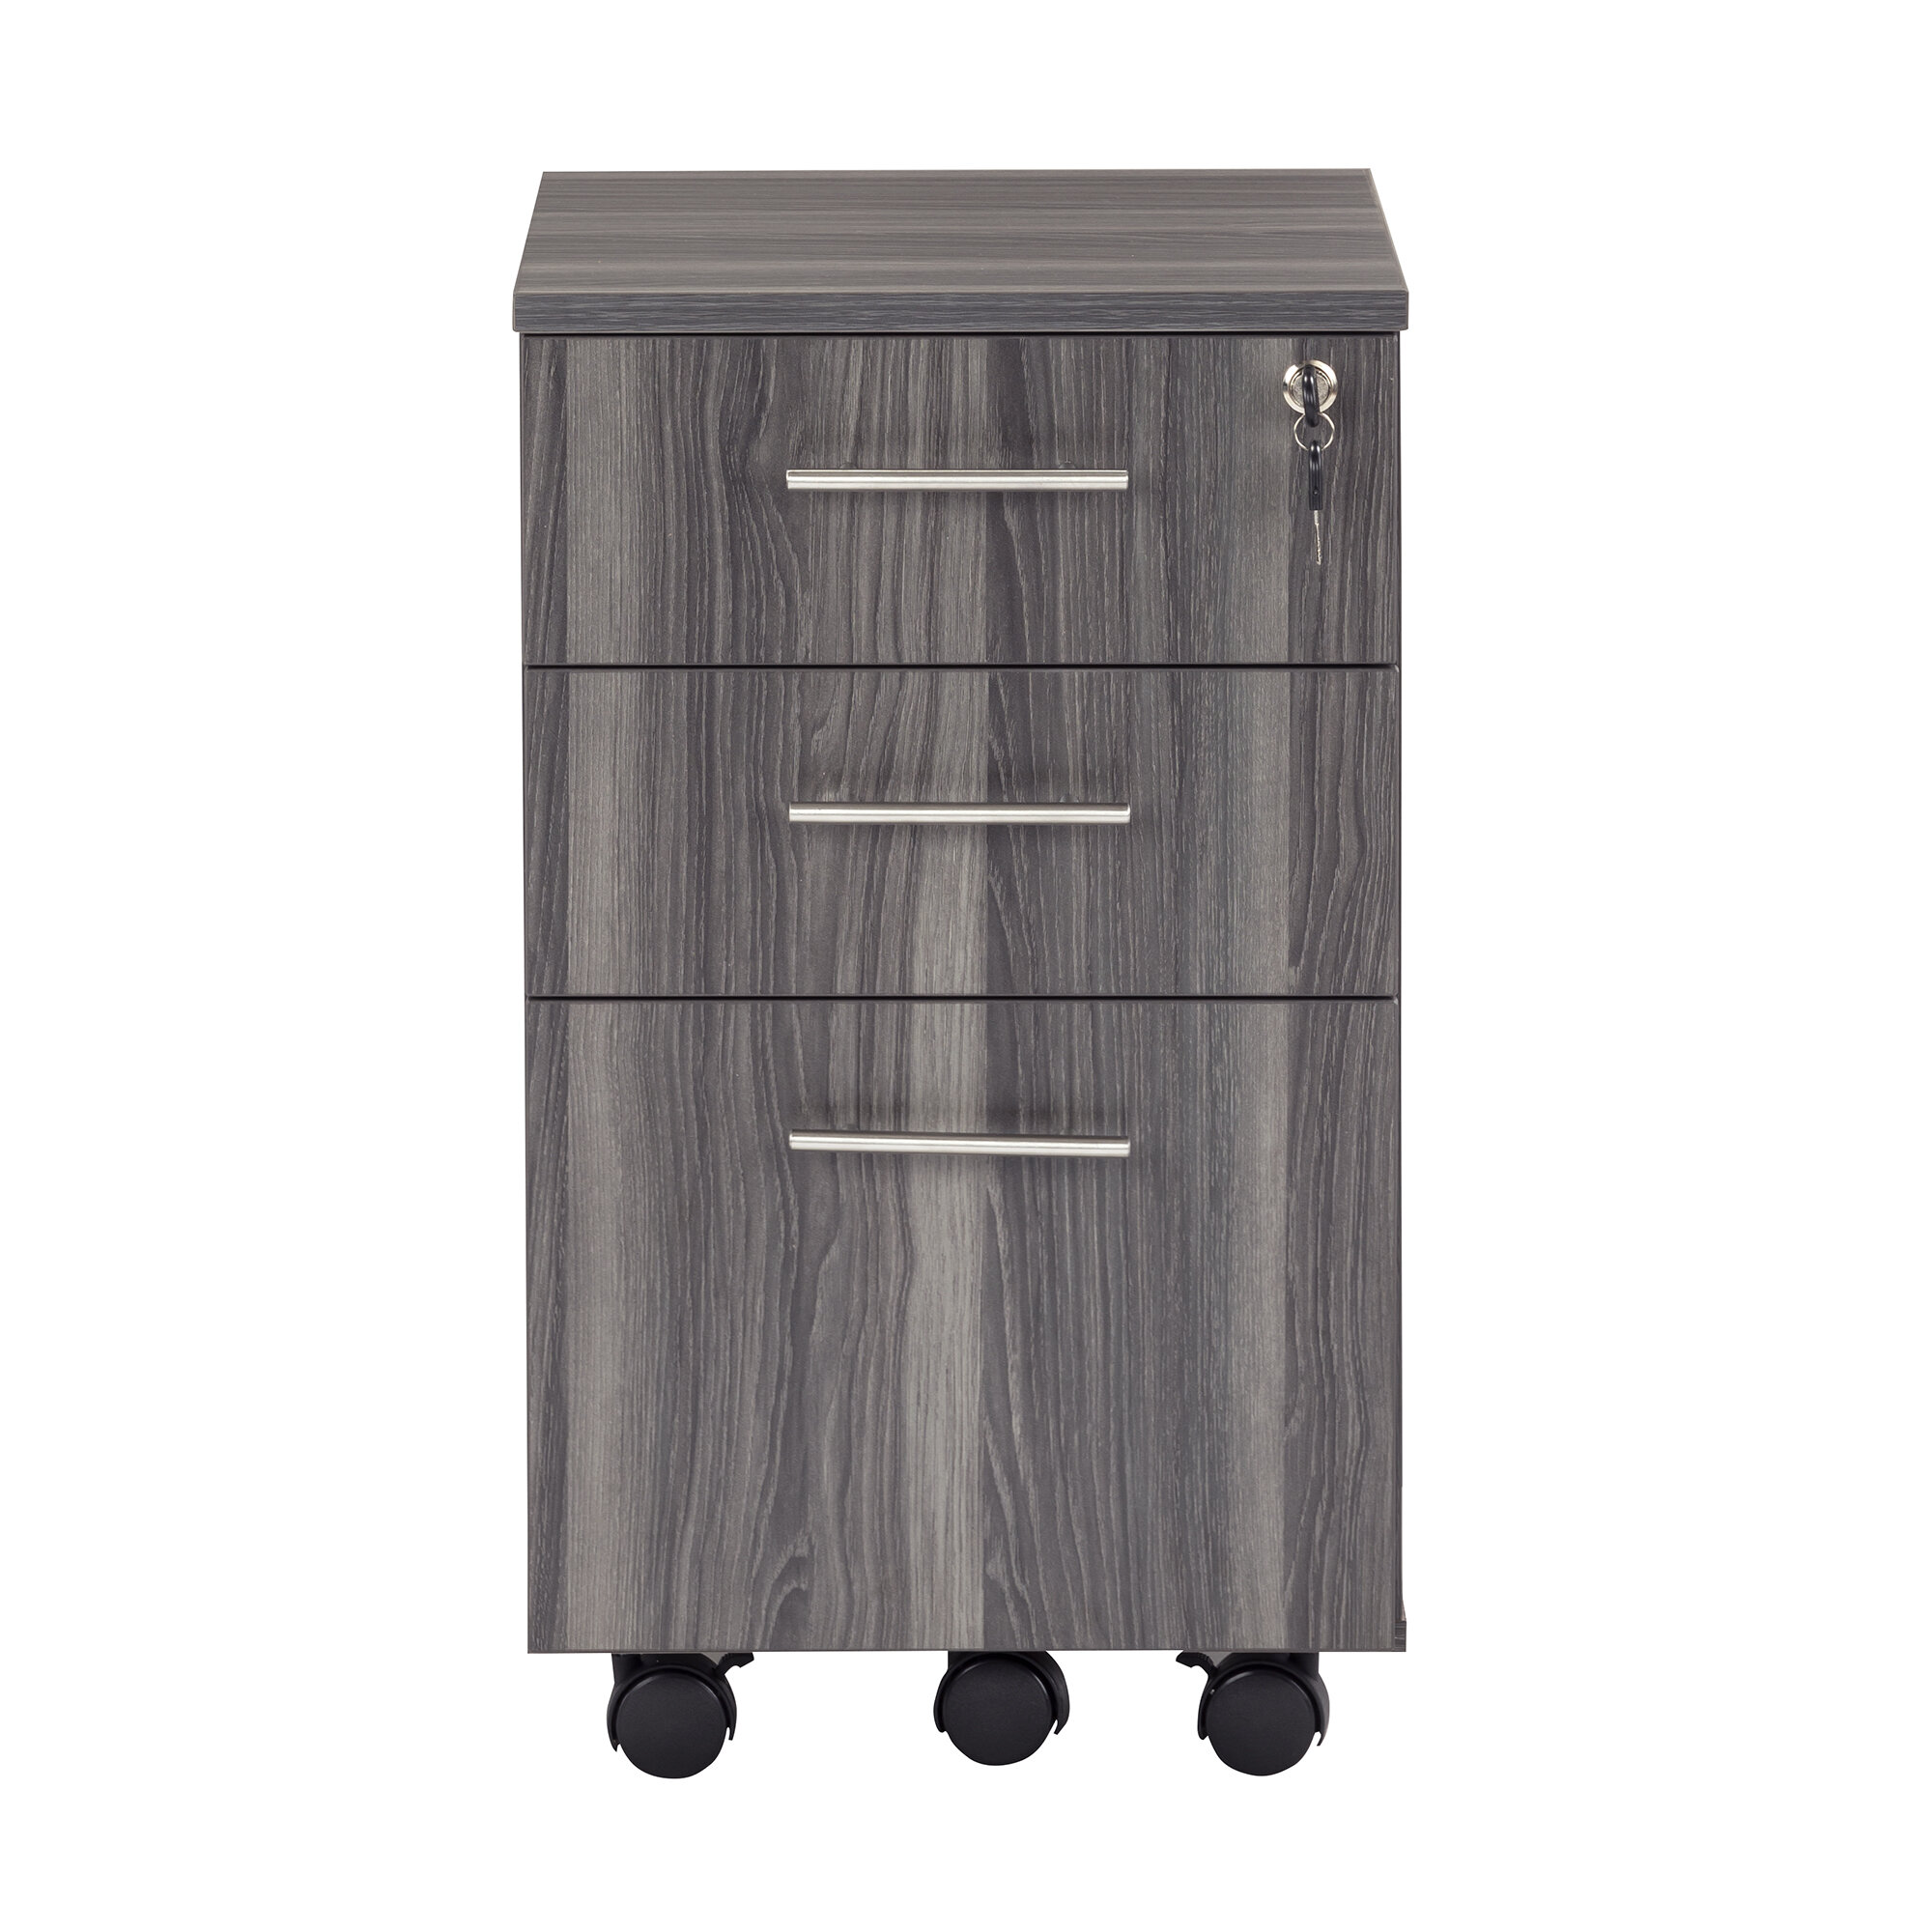 Symple Stuff Troche 3 Drawer Mobile Vertical Filing Cabinet